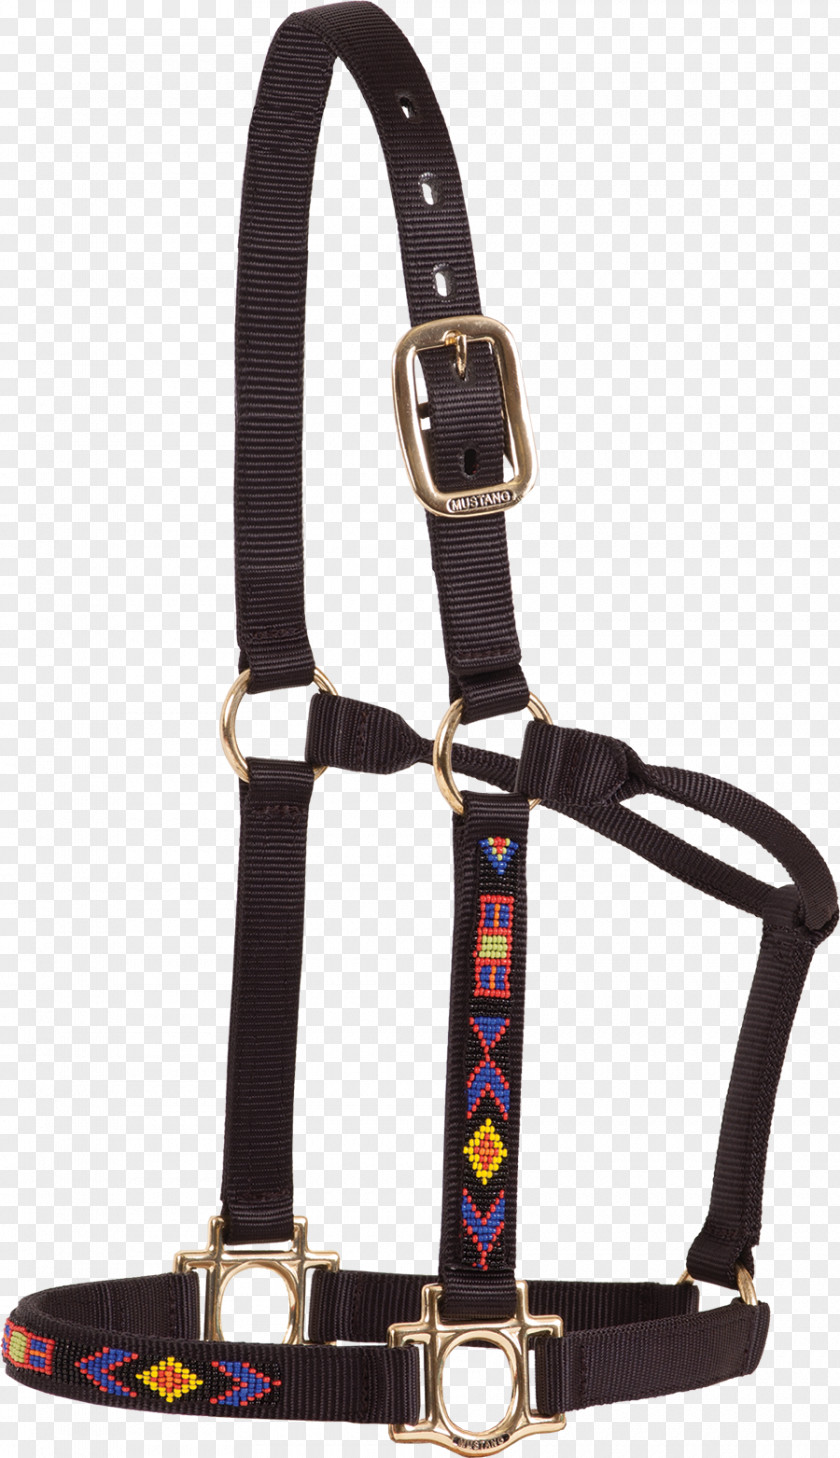 American-style Halter Horse Tack Strap Leash Buckle PNG